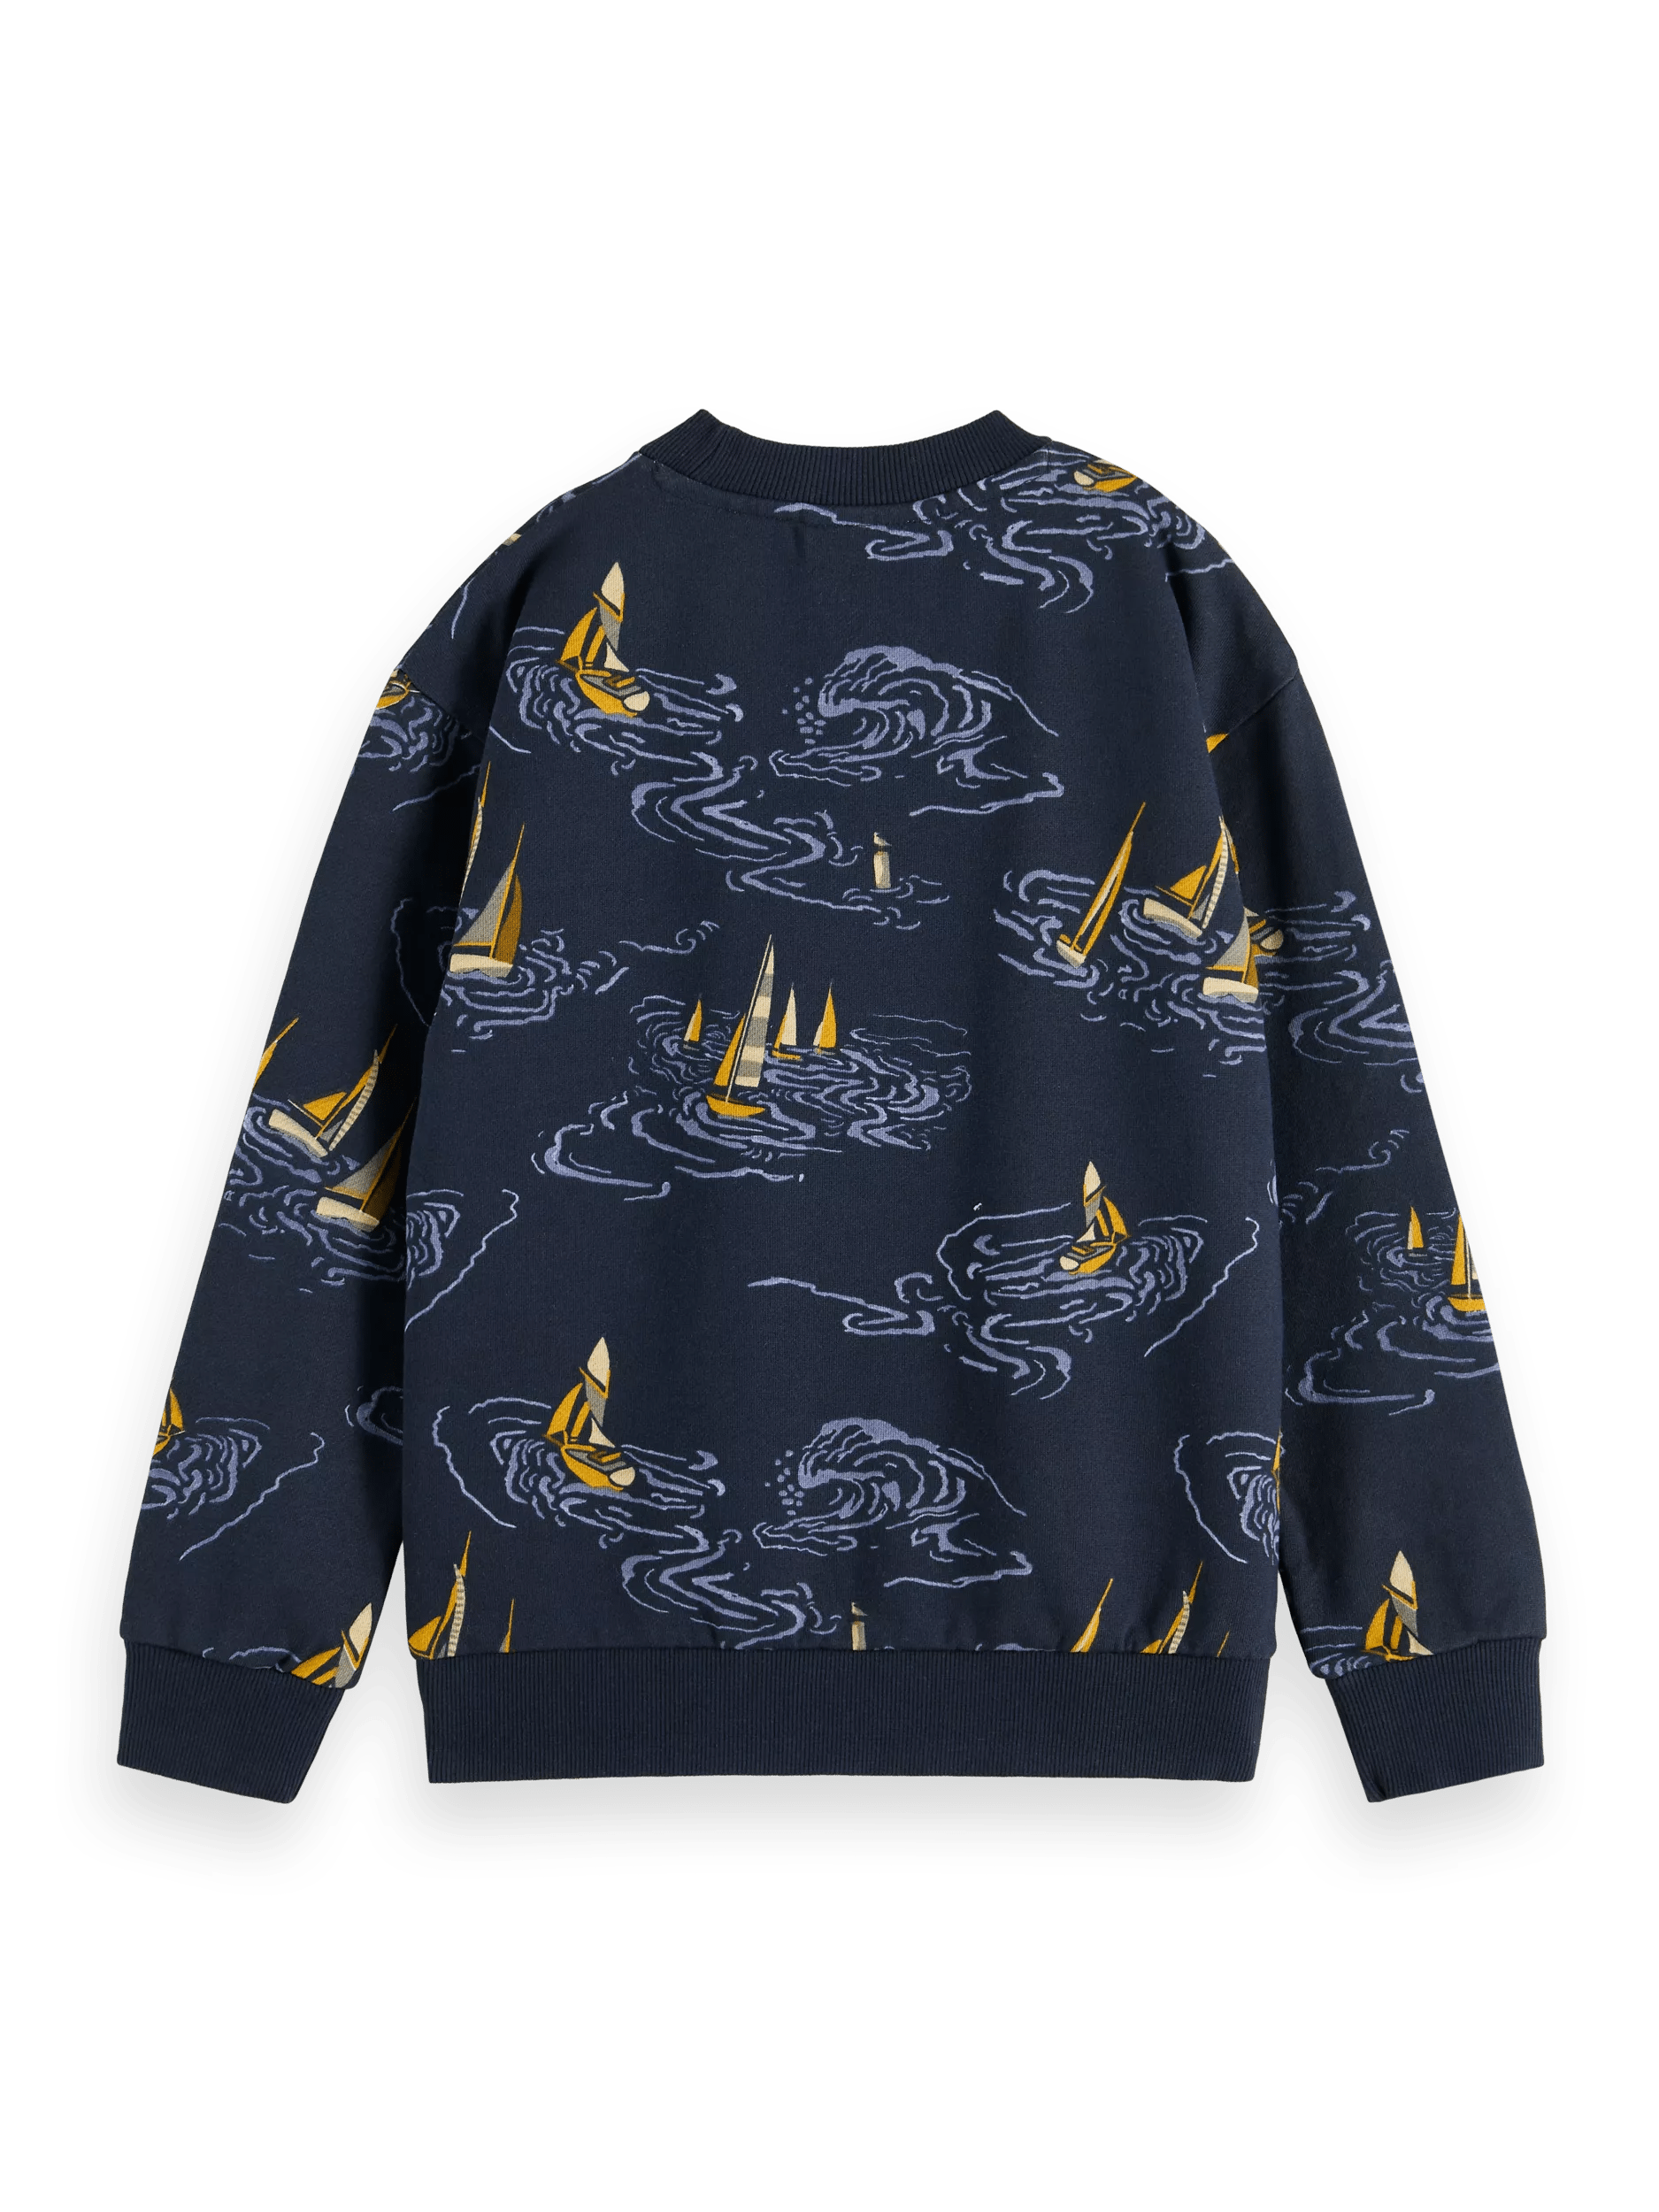 Scotch & Soda Relaxed fit printed sweatshirt BCK